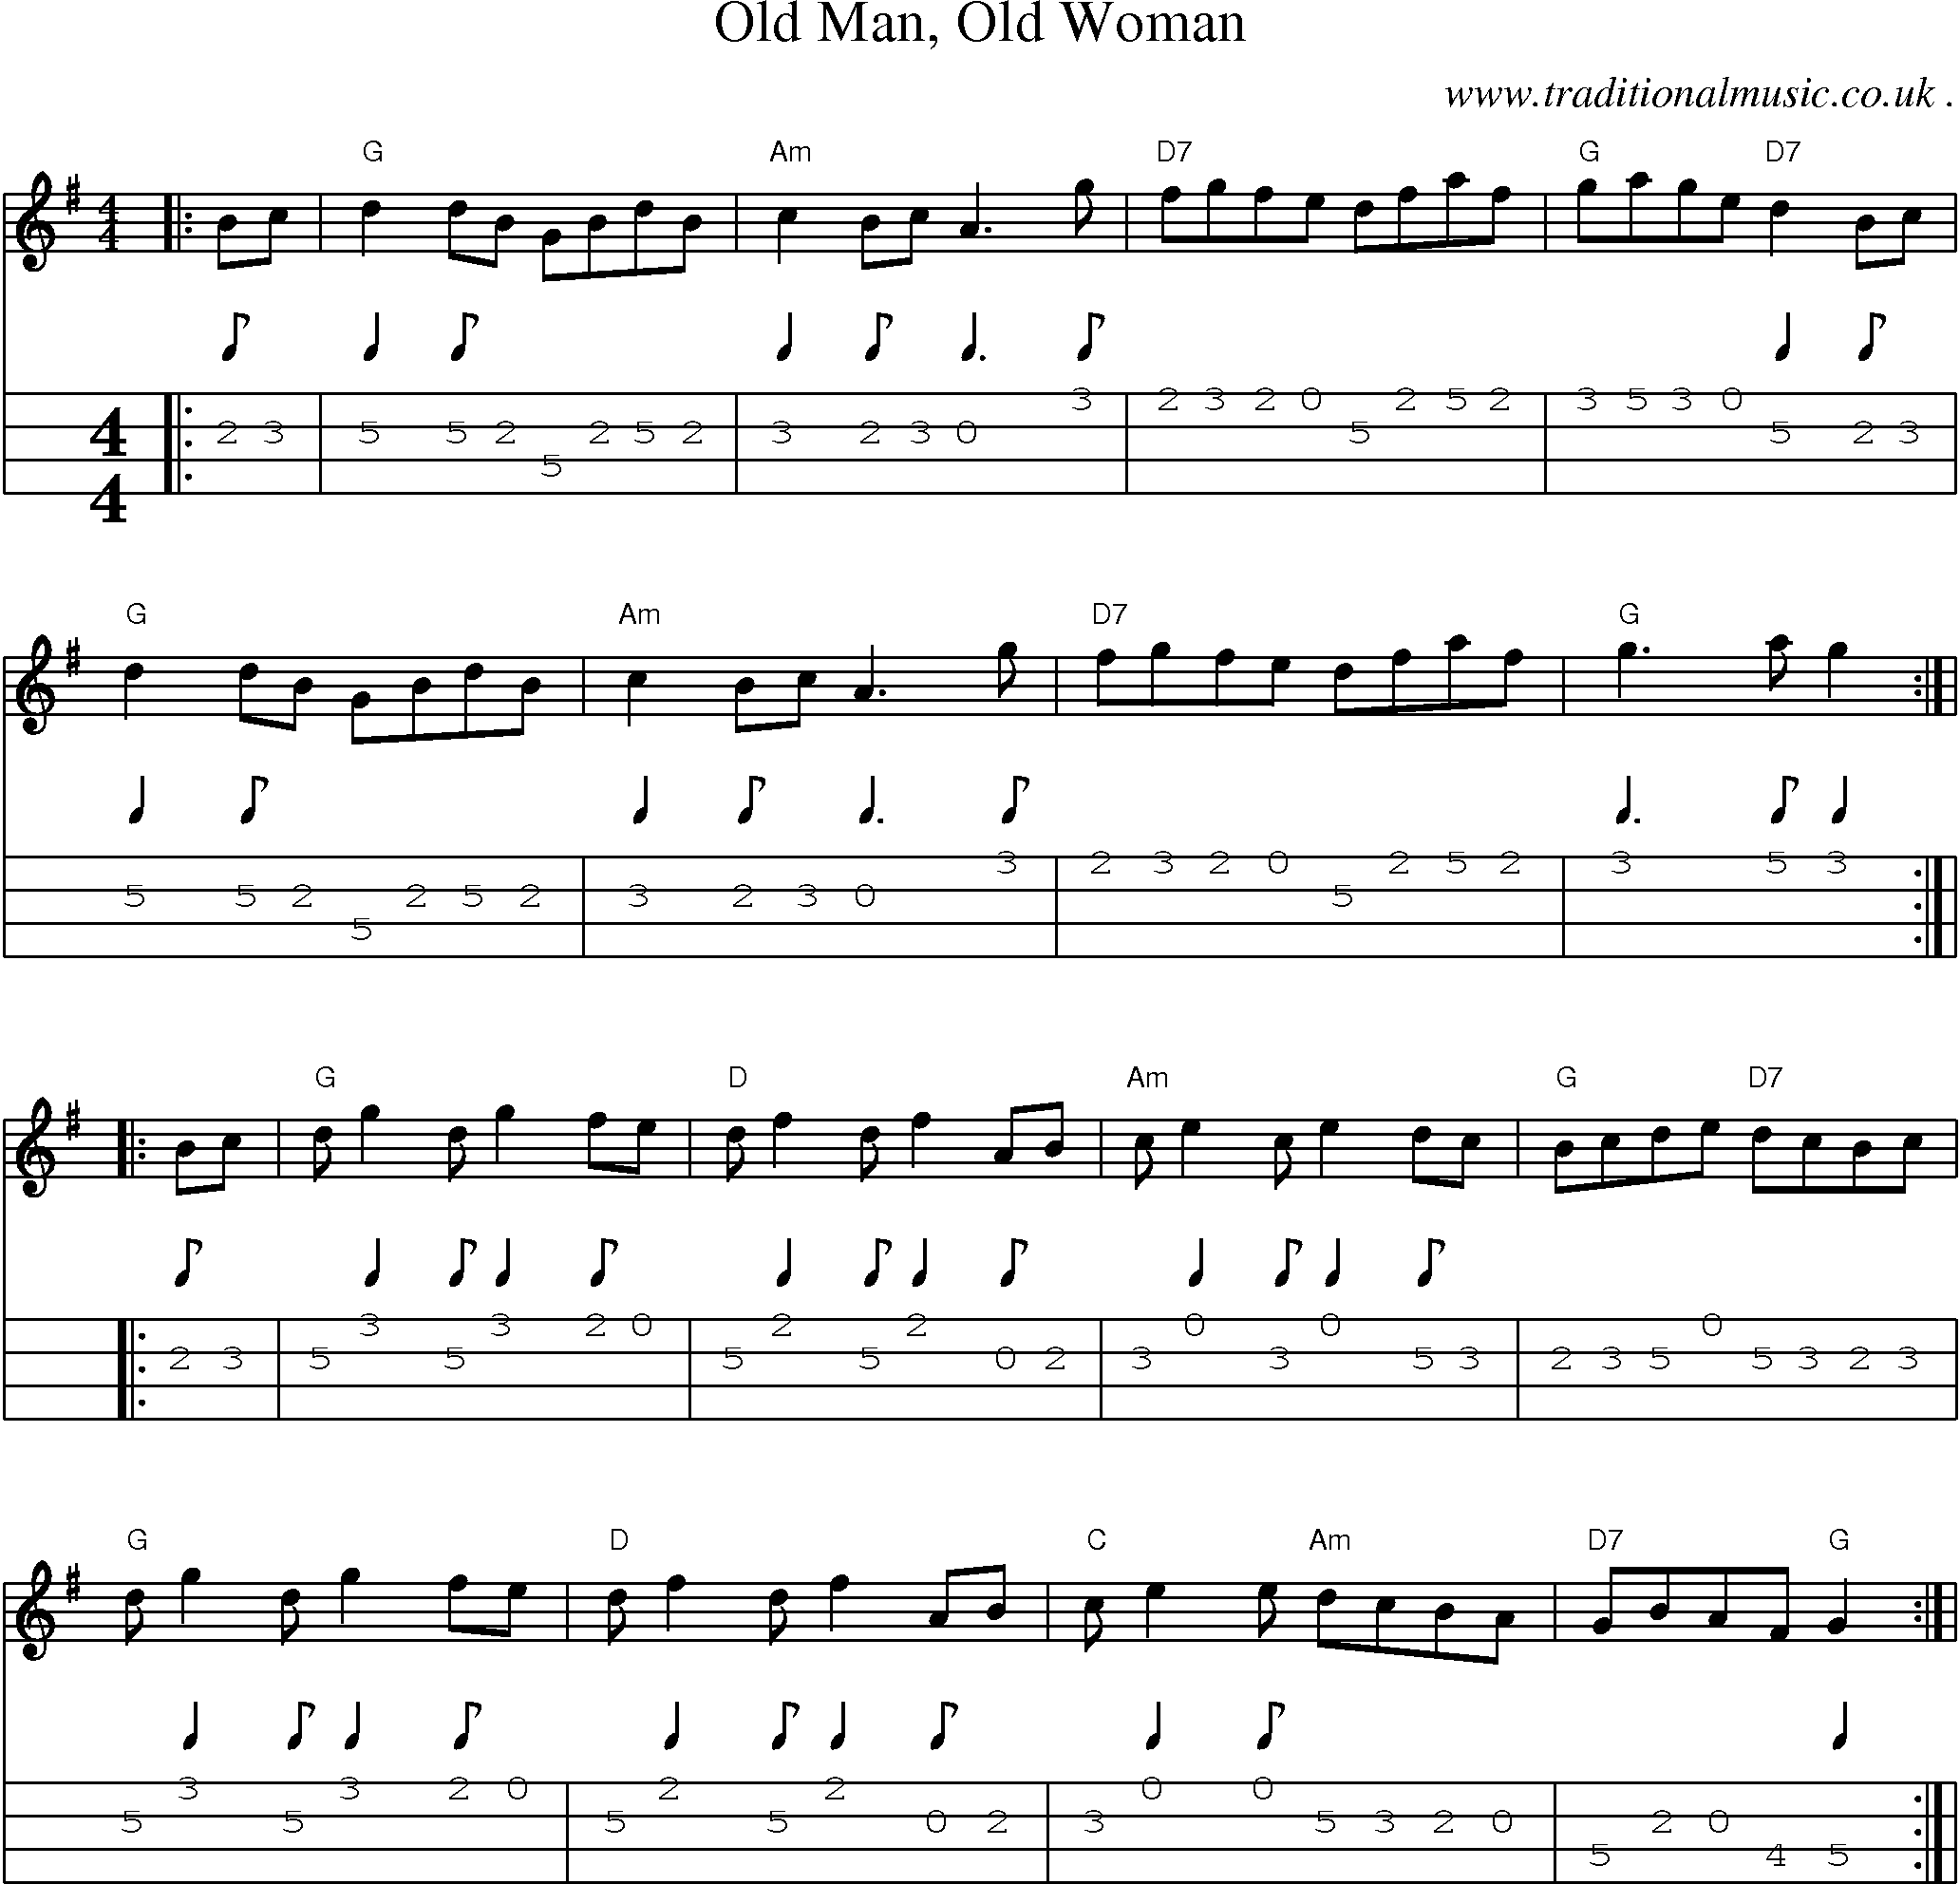 Music Score and Guitar Tabs for Old Man Old Woman